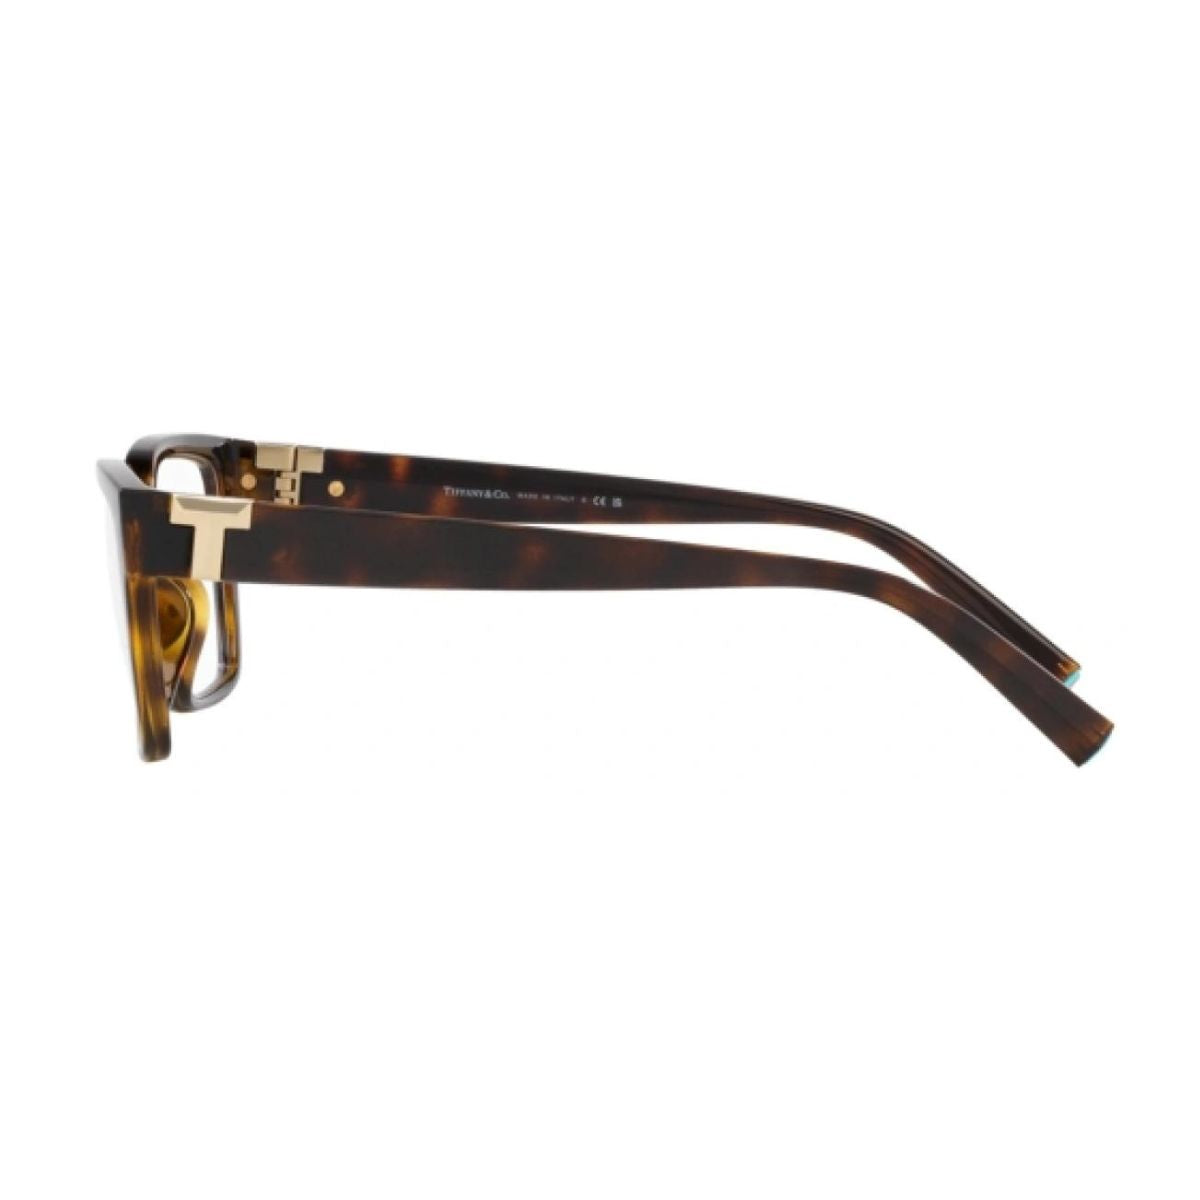 "Tiffany & Co 2232-U 8015 Spectacle Eyeglases Frame For Women's At Optorium"